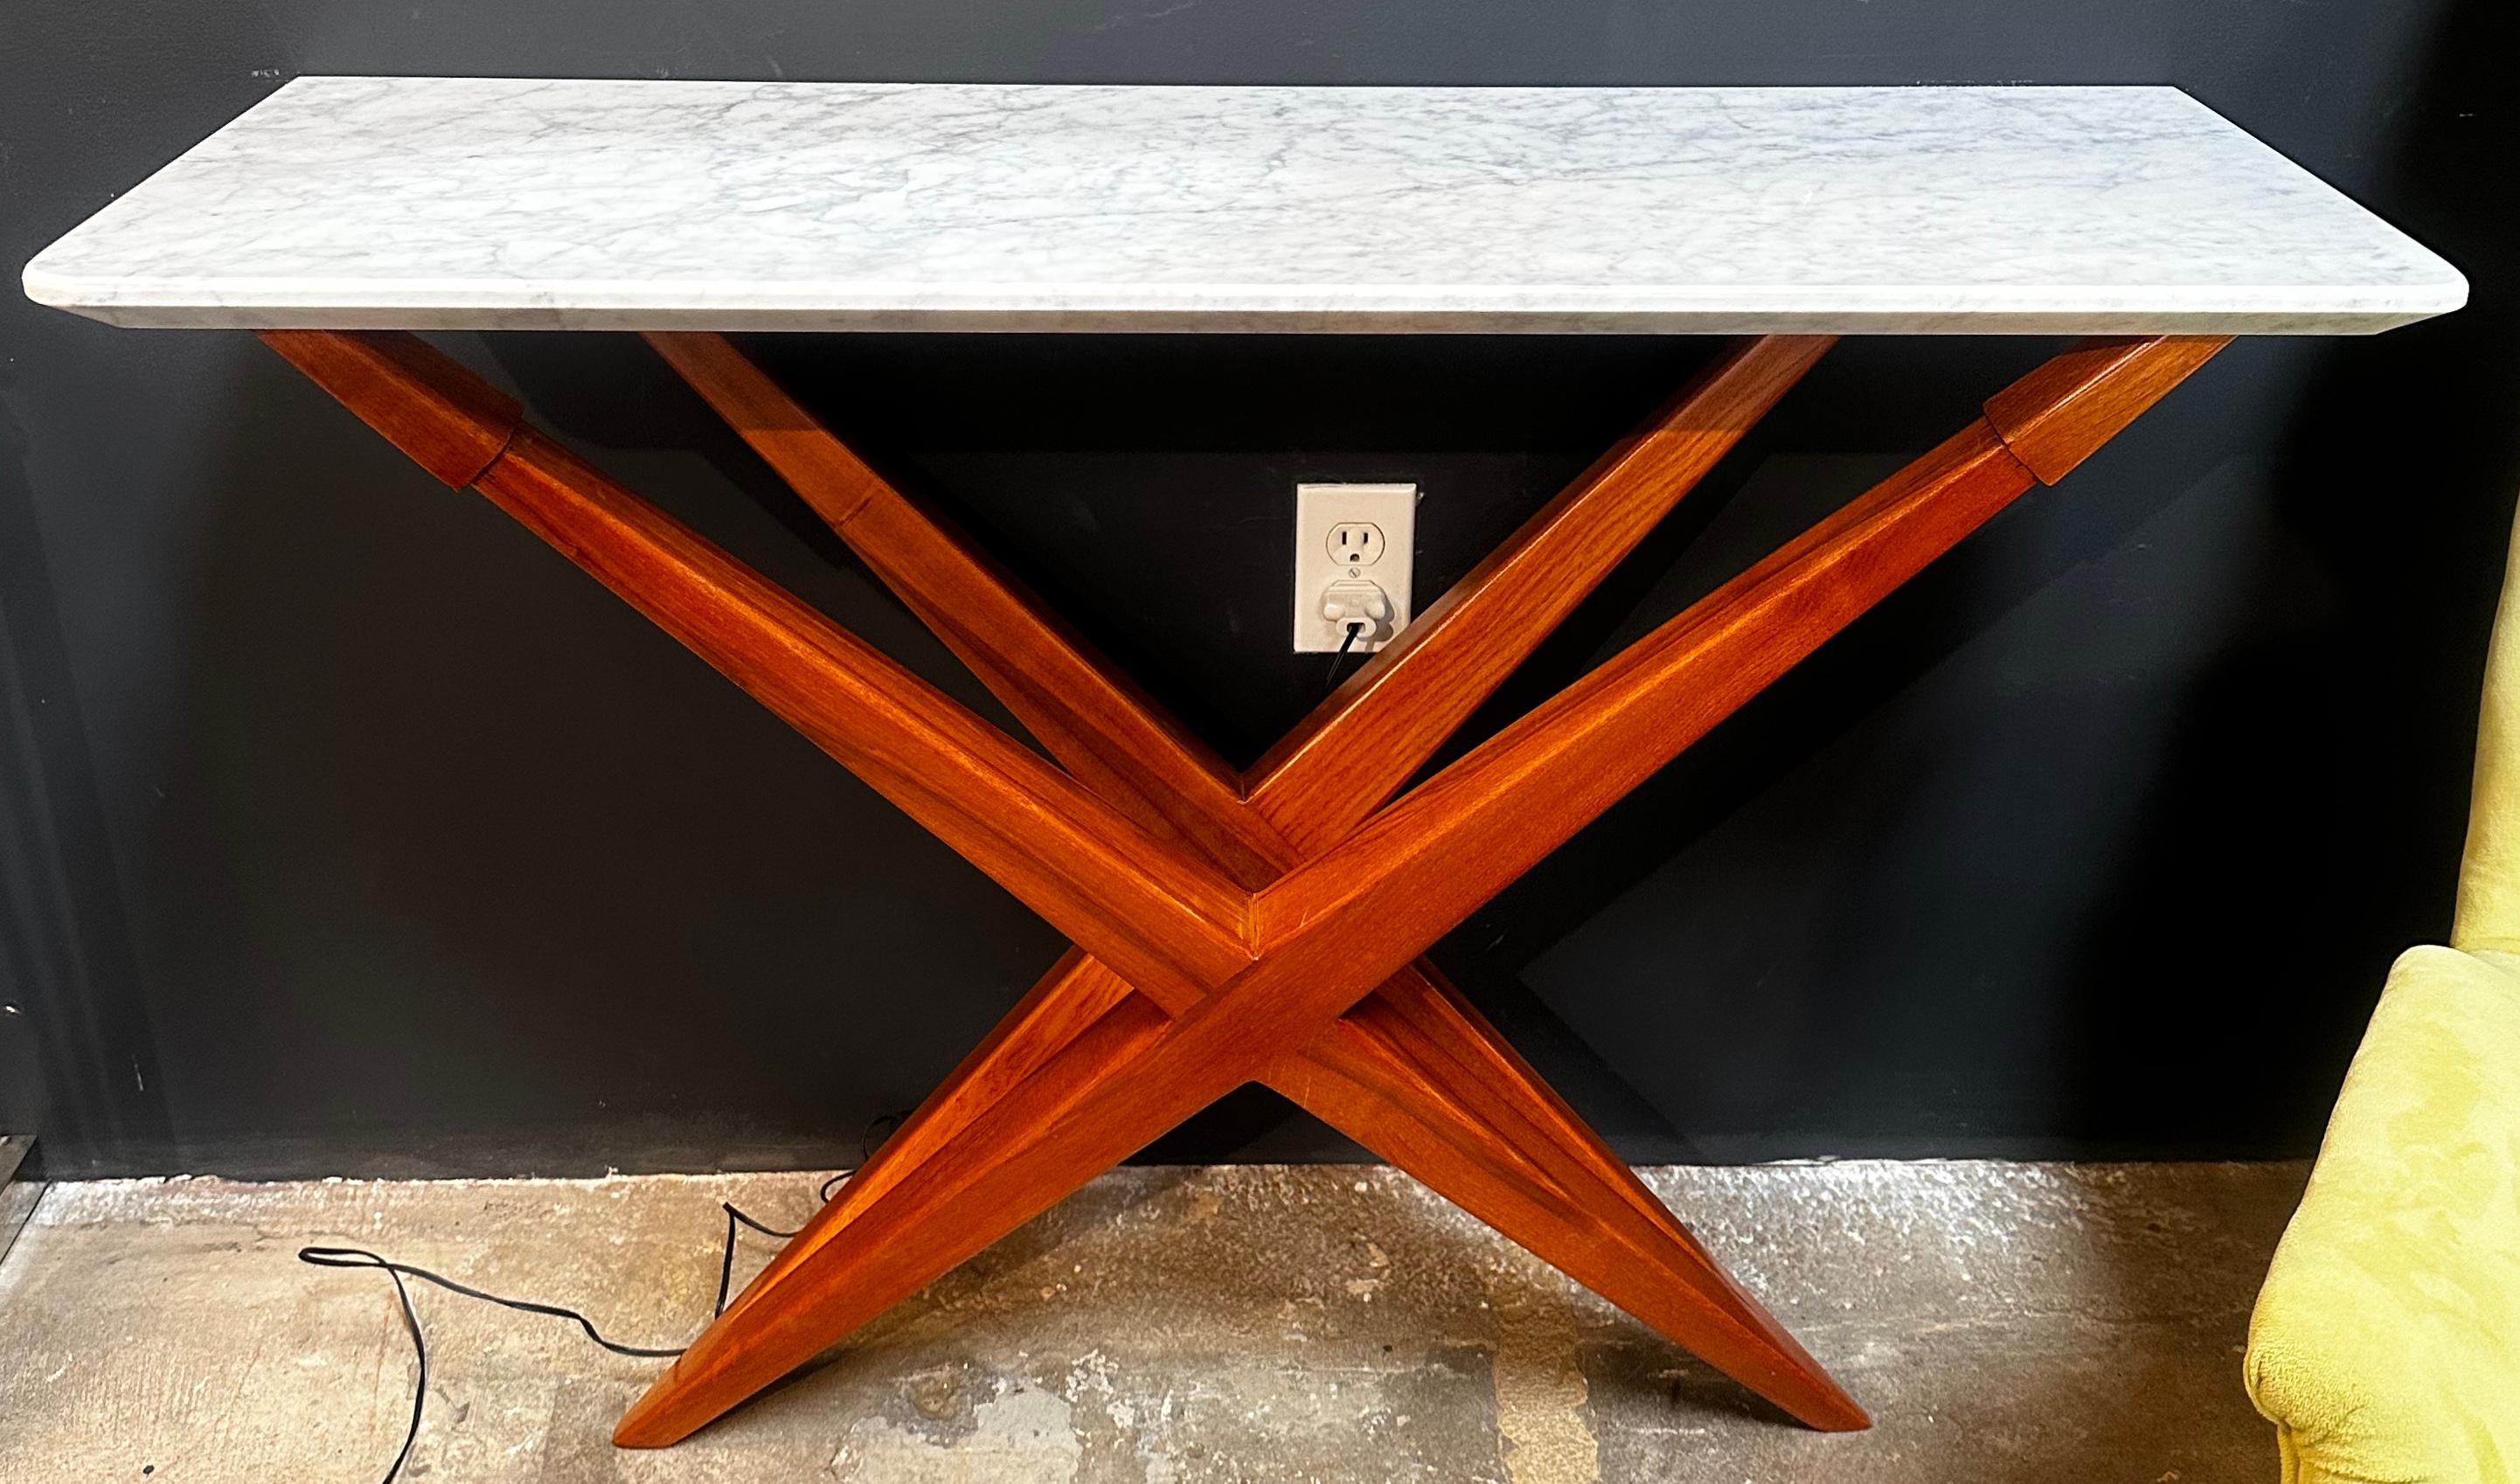 This beautiful console table is made from solid walnut wood pieces forming this wonderful architectural design. The console is topped by a thick white marble. A very high quality piece of hand made furniture with great details.